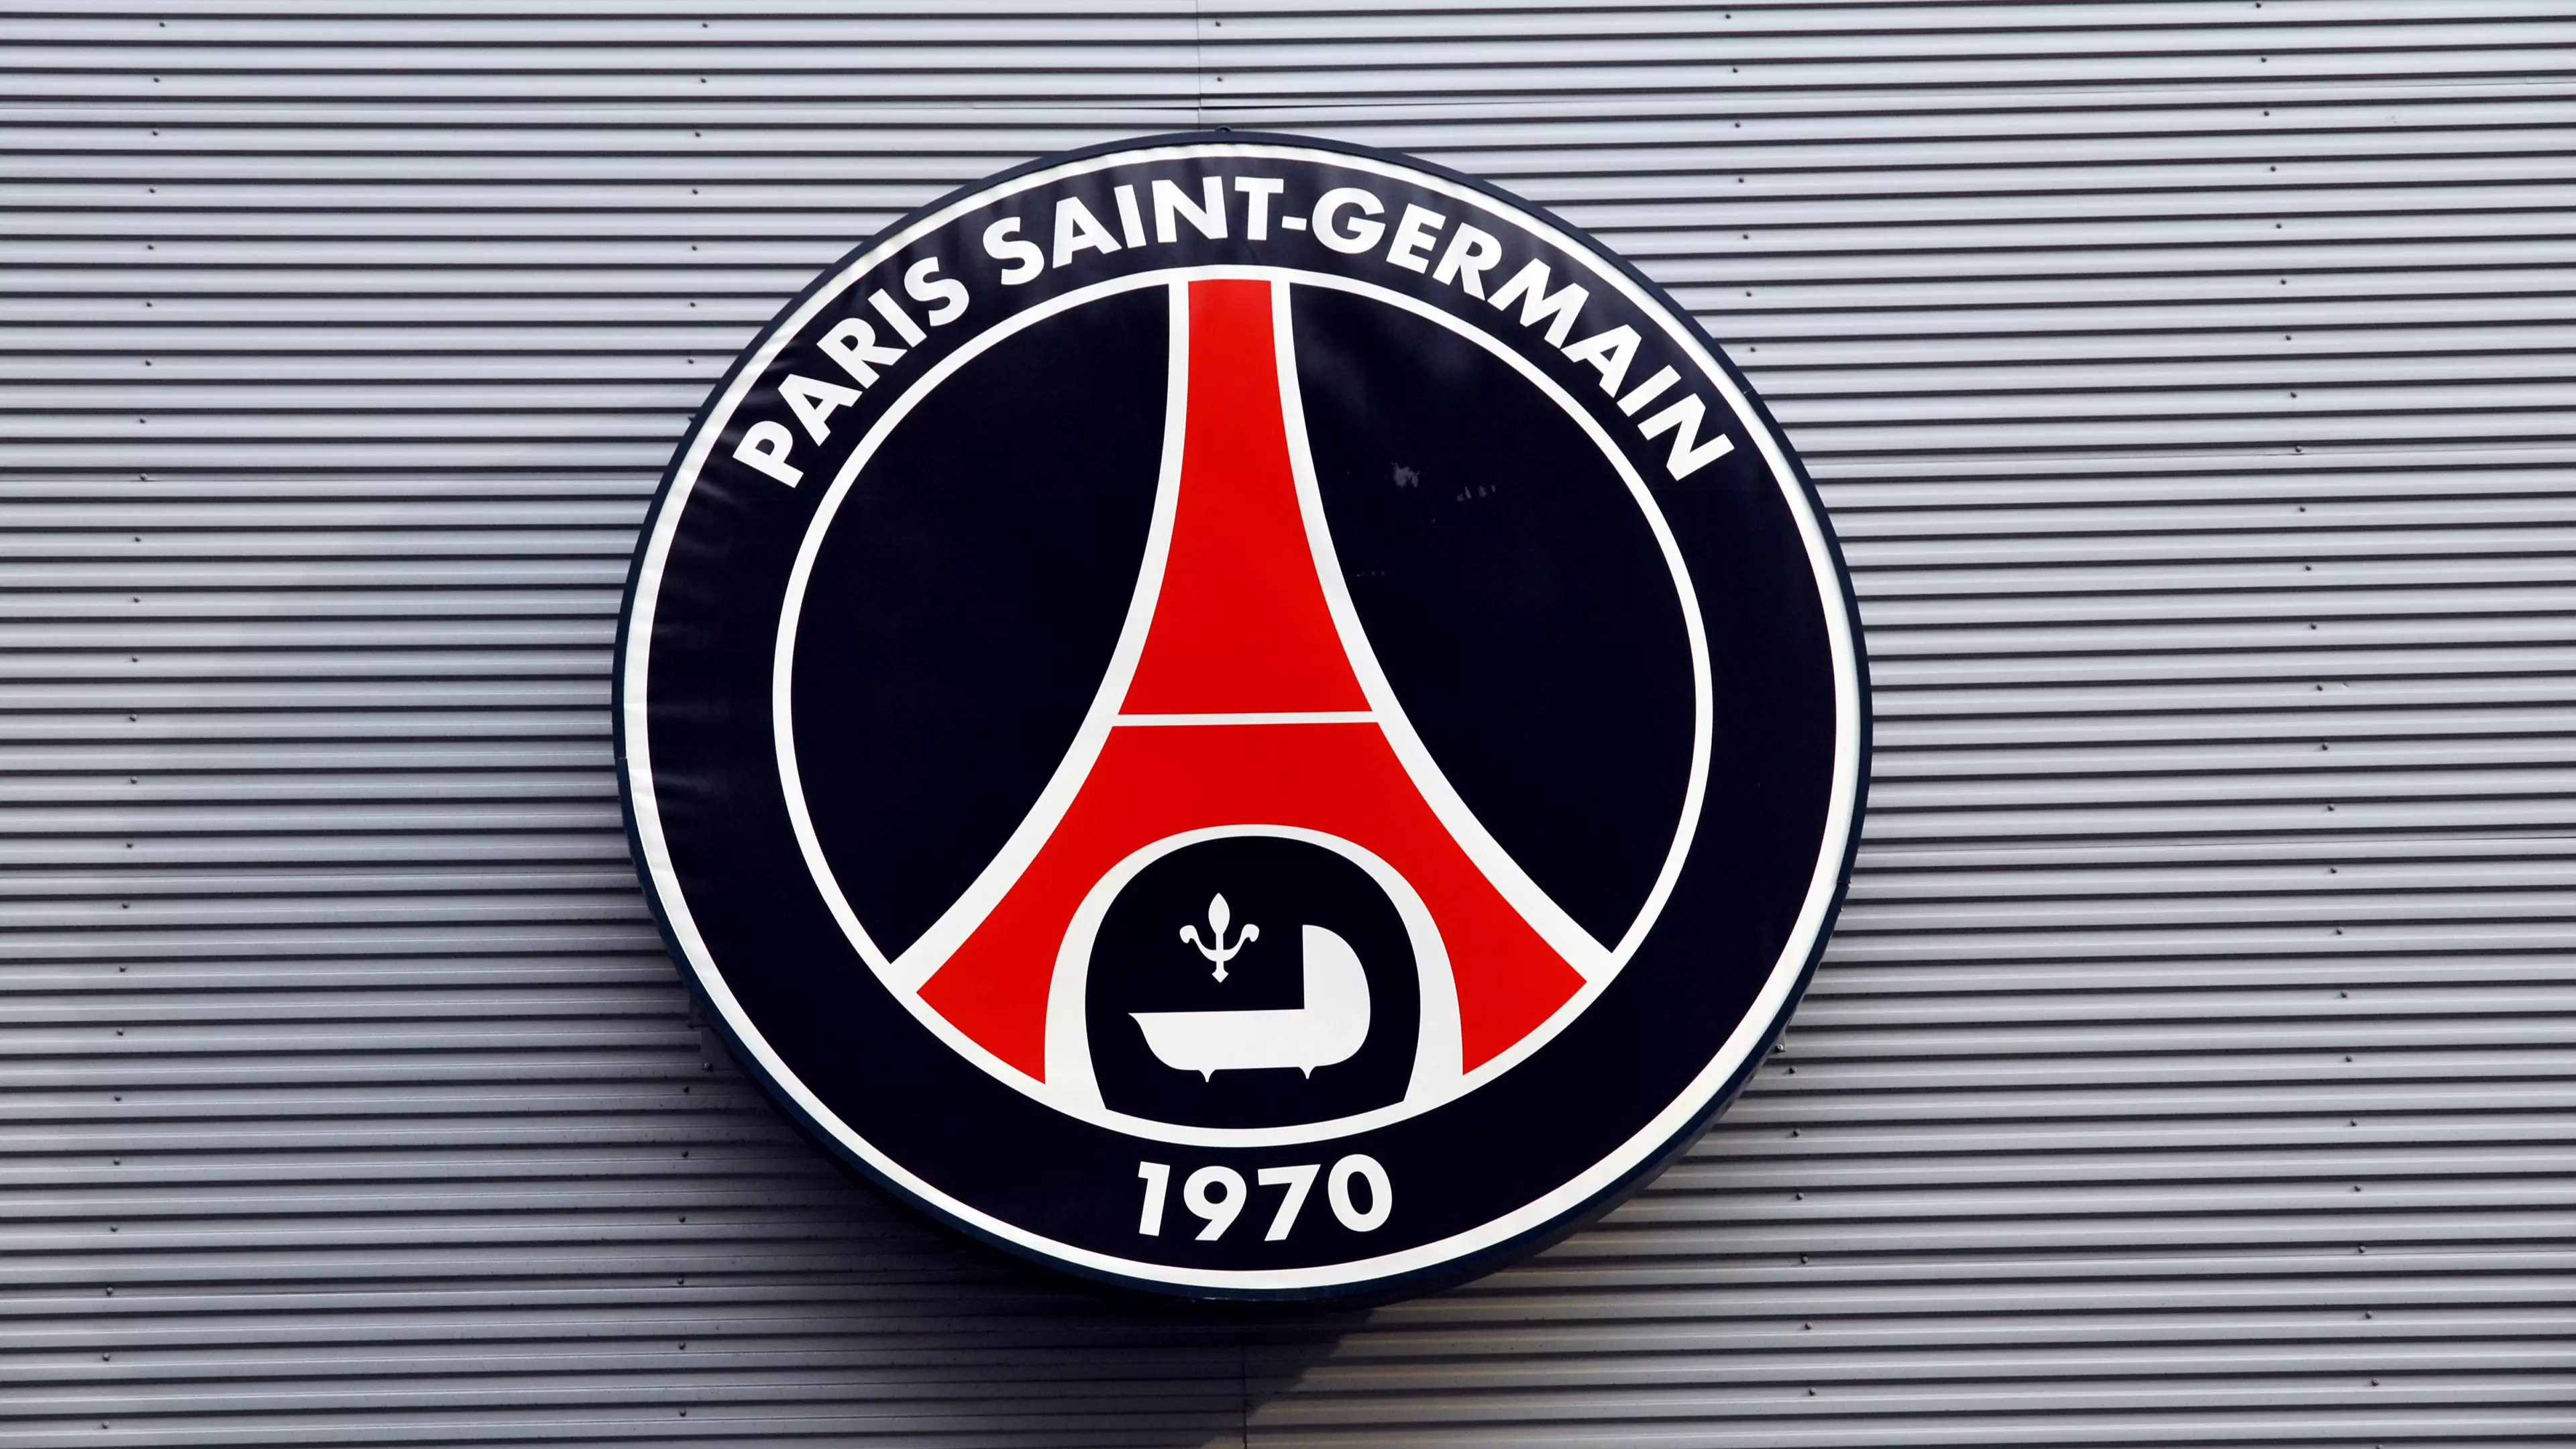 Former Cheltenham Town Player To Sign For Paris Saint-Germain In £13 Million Move